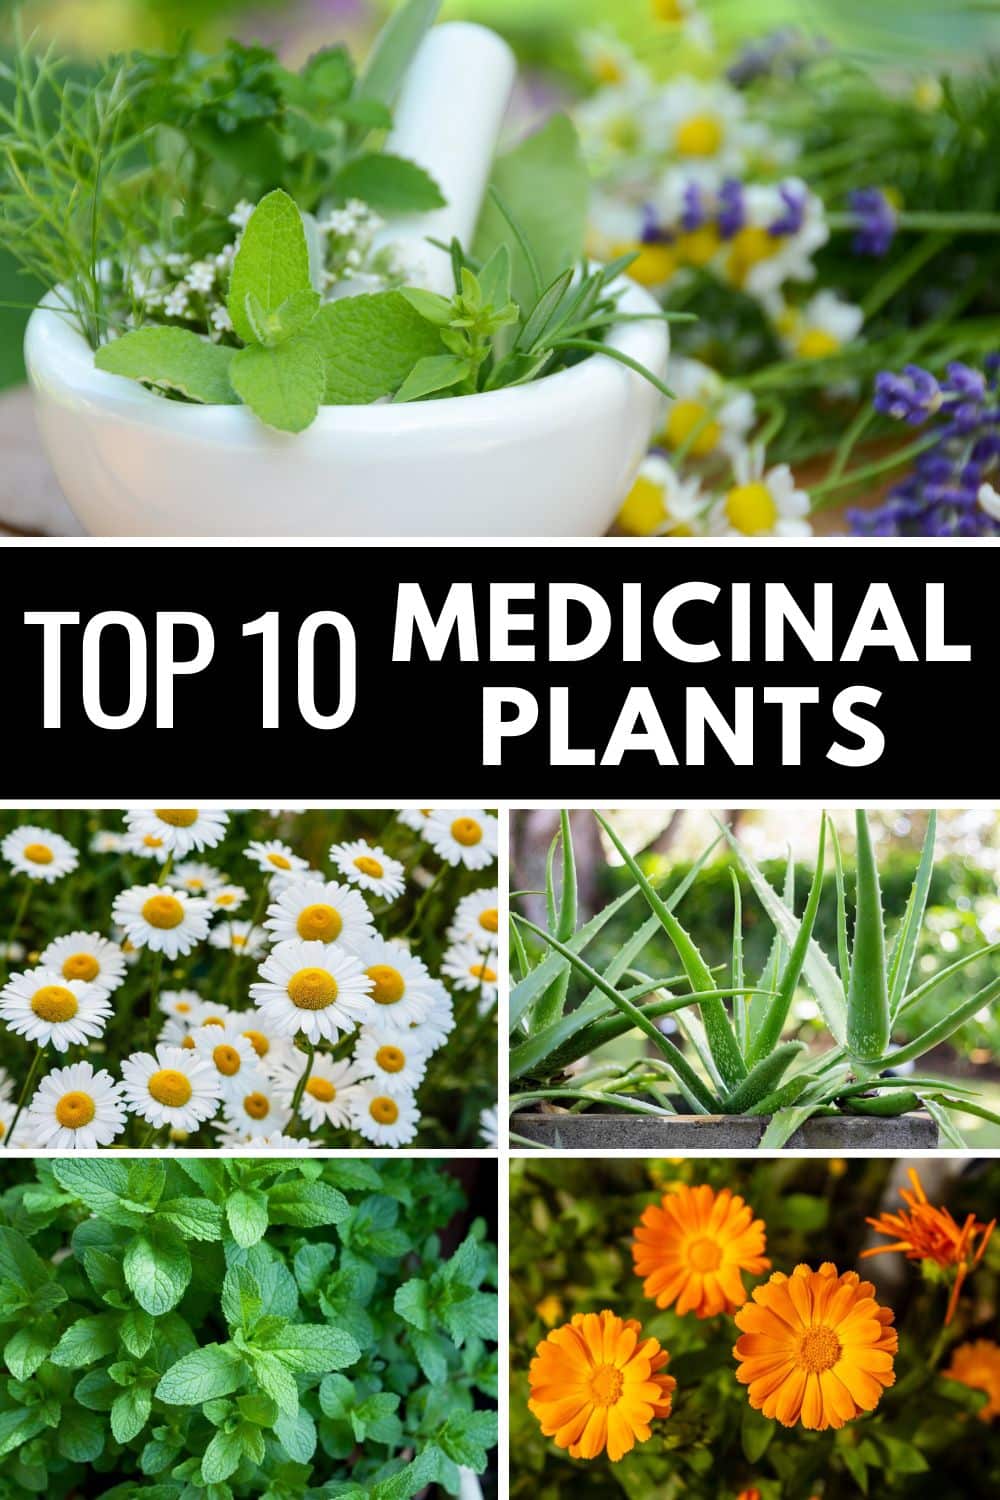 Discover the remarkable healing properties of the Top 10 Medicinal Plants, renowned for their therapeutic benefits and natural remedies.